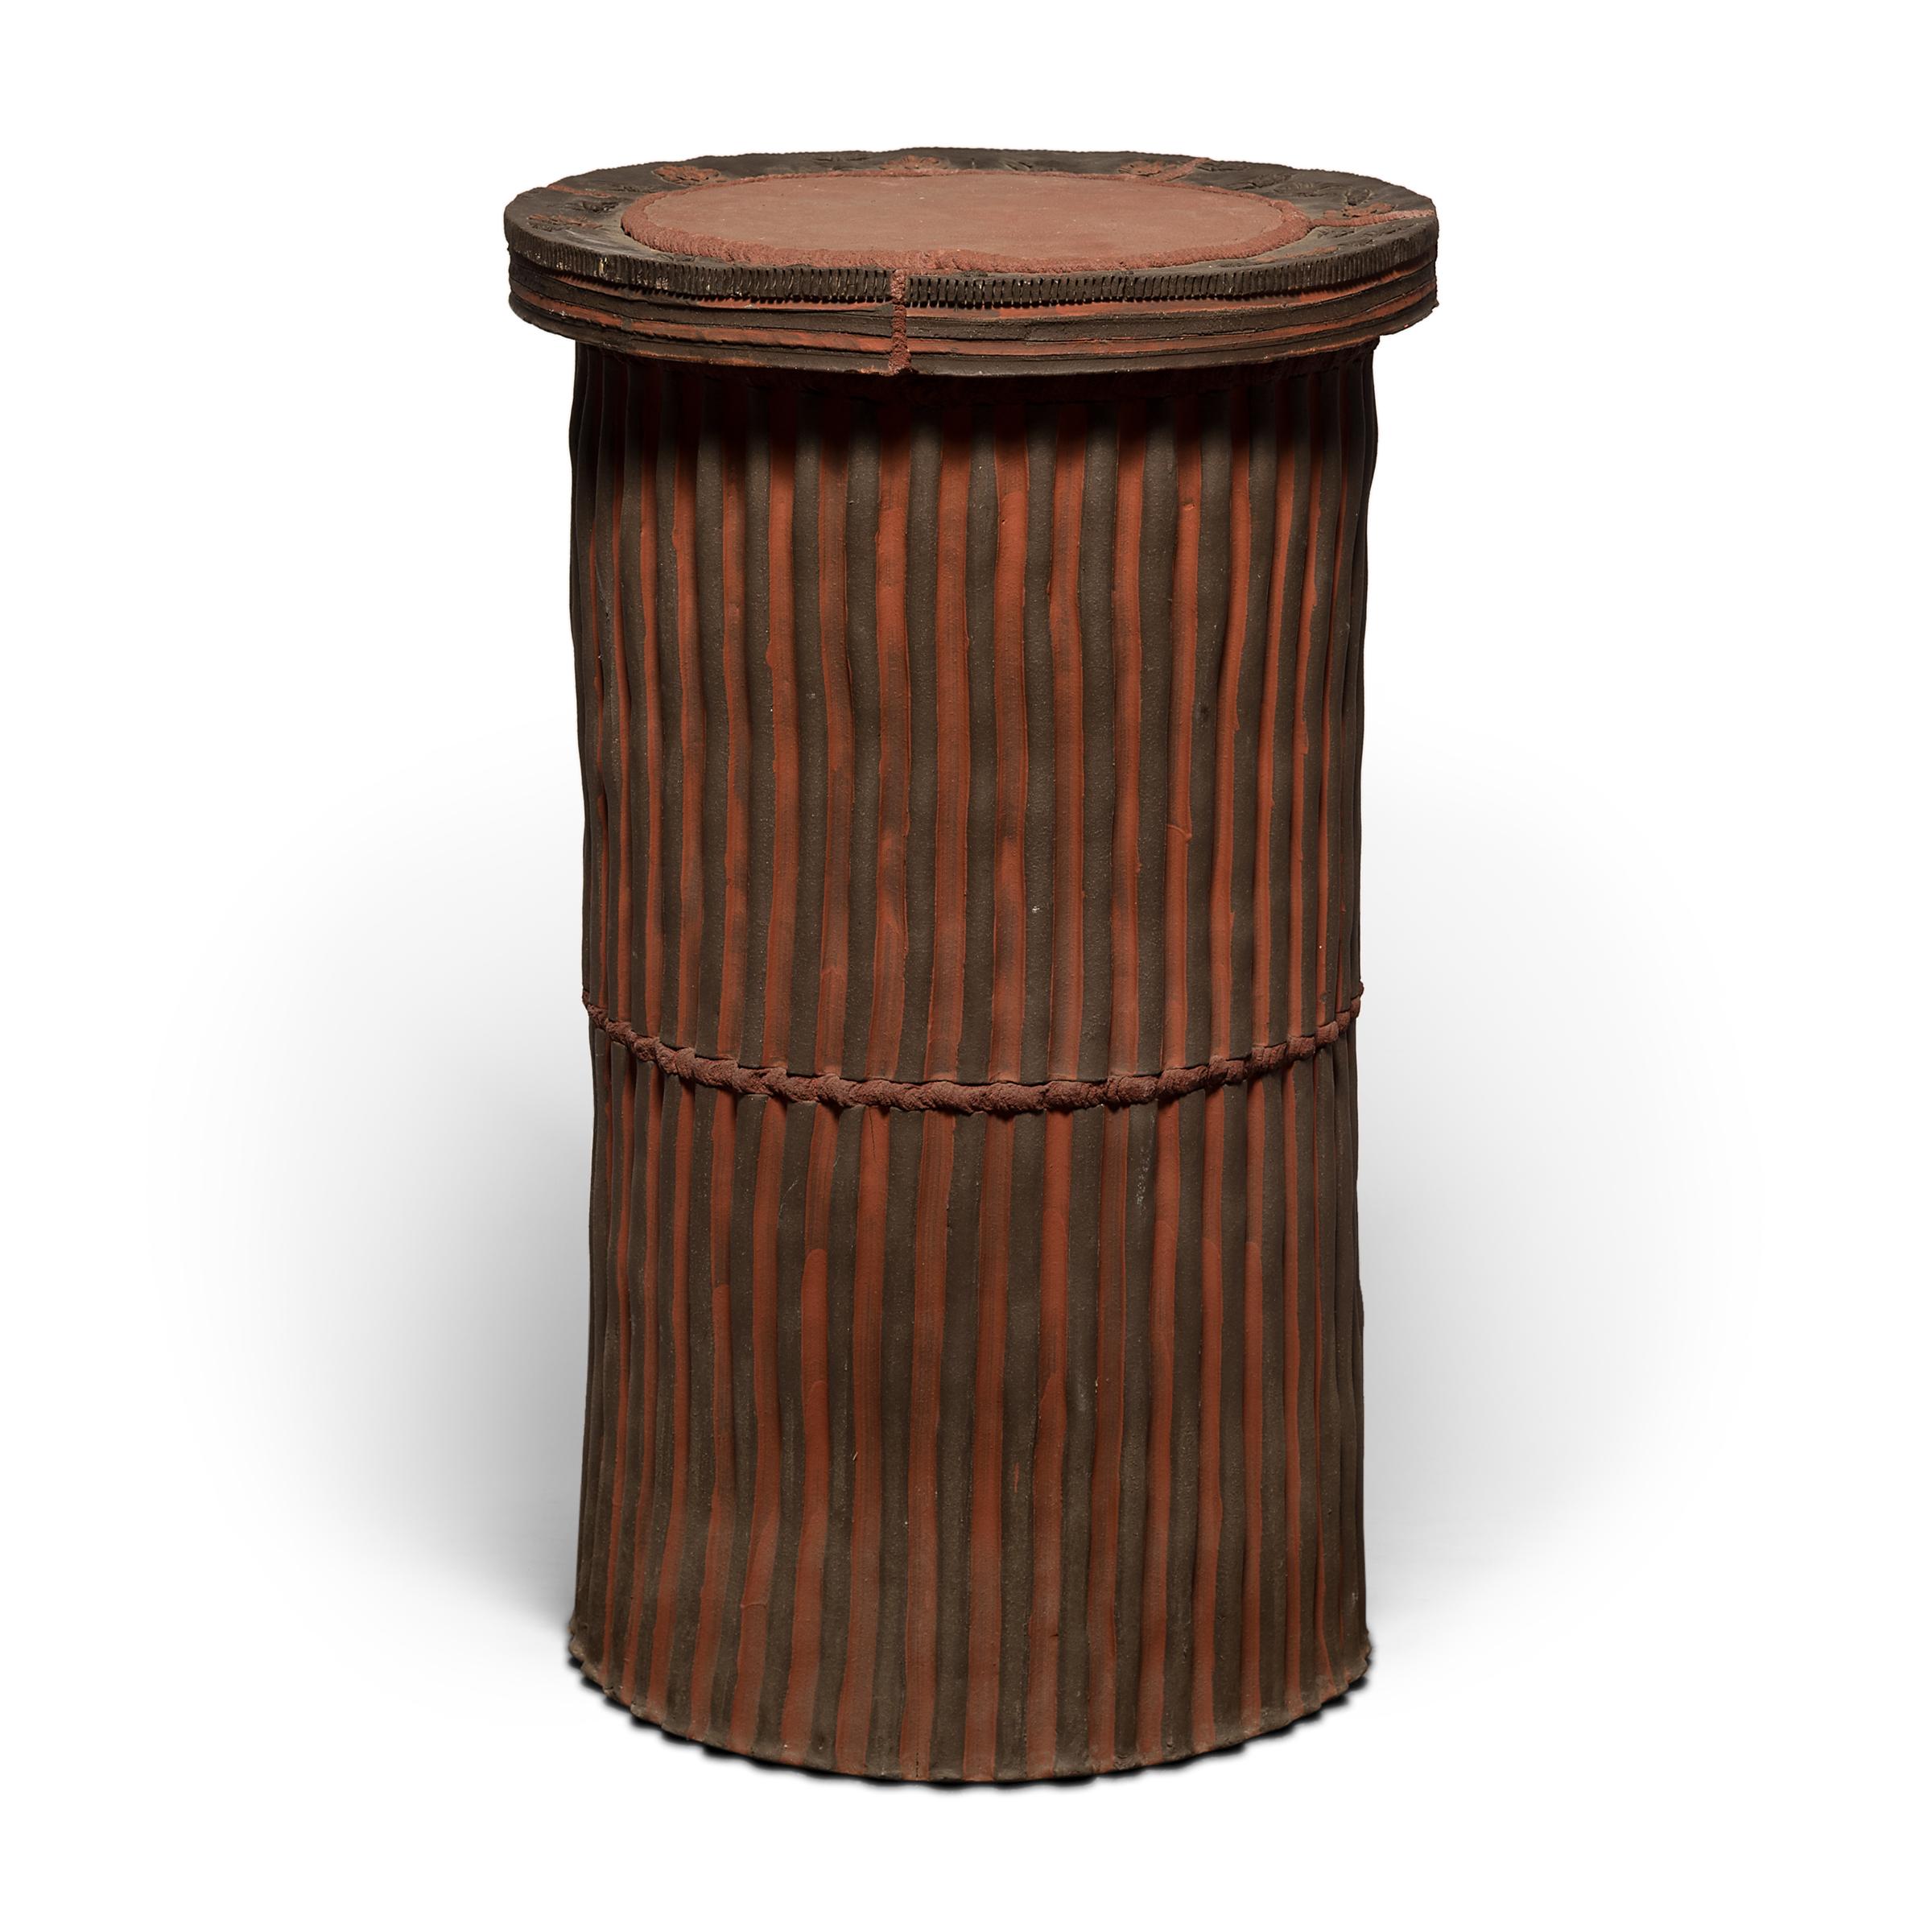 Both a functional piece of furniture and an intriguing sculpture, this ceramic pedestal is a statement-making centerpiece in any room. Mixing terracotta and ebony hues, the pedestal is carefully constructed of ropes, slabs, and smears of clay. The